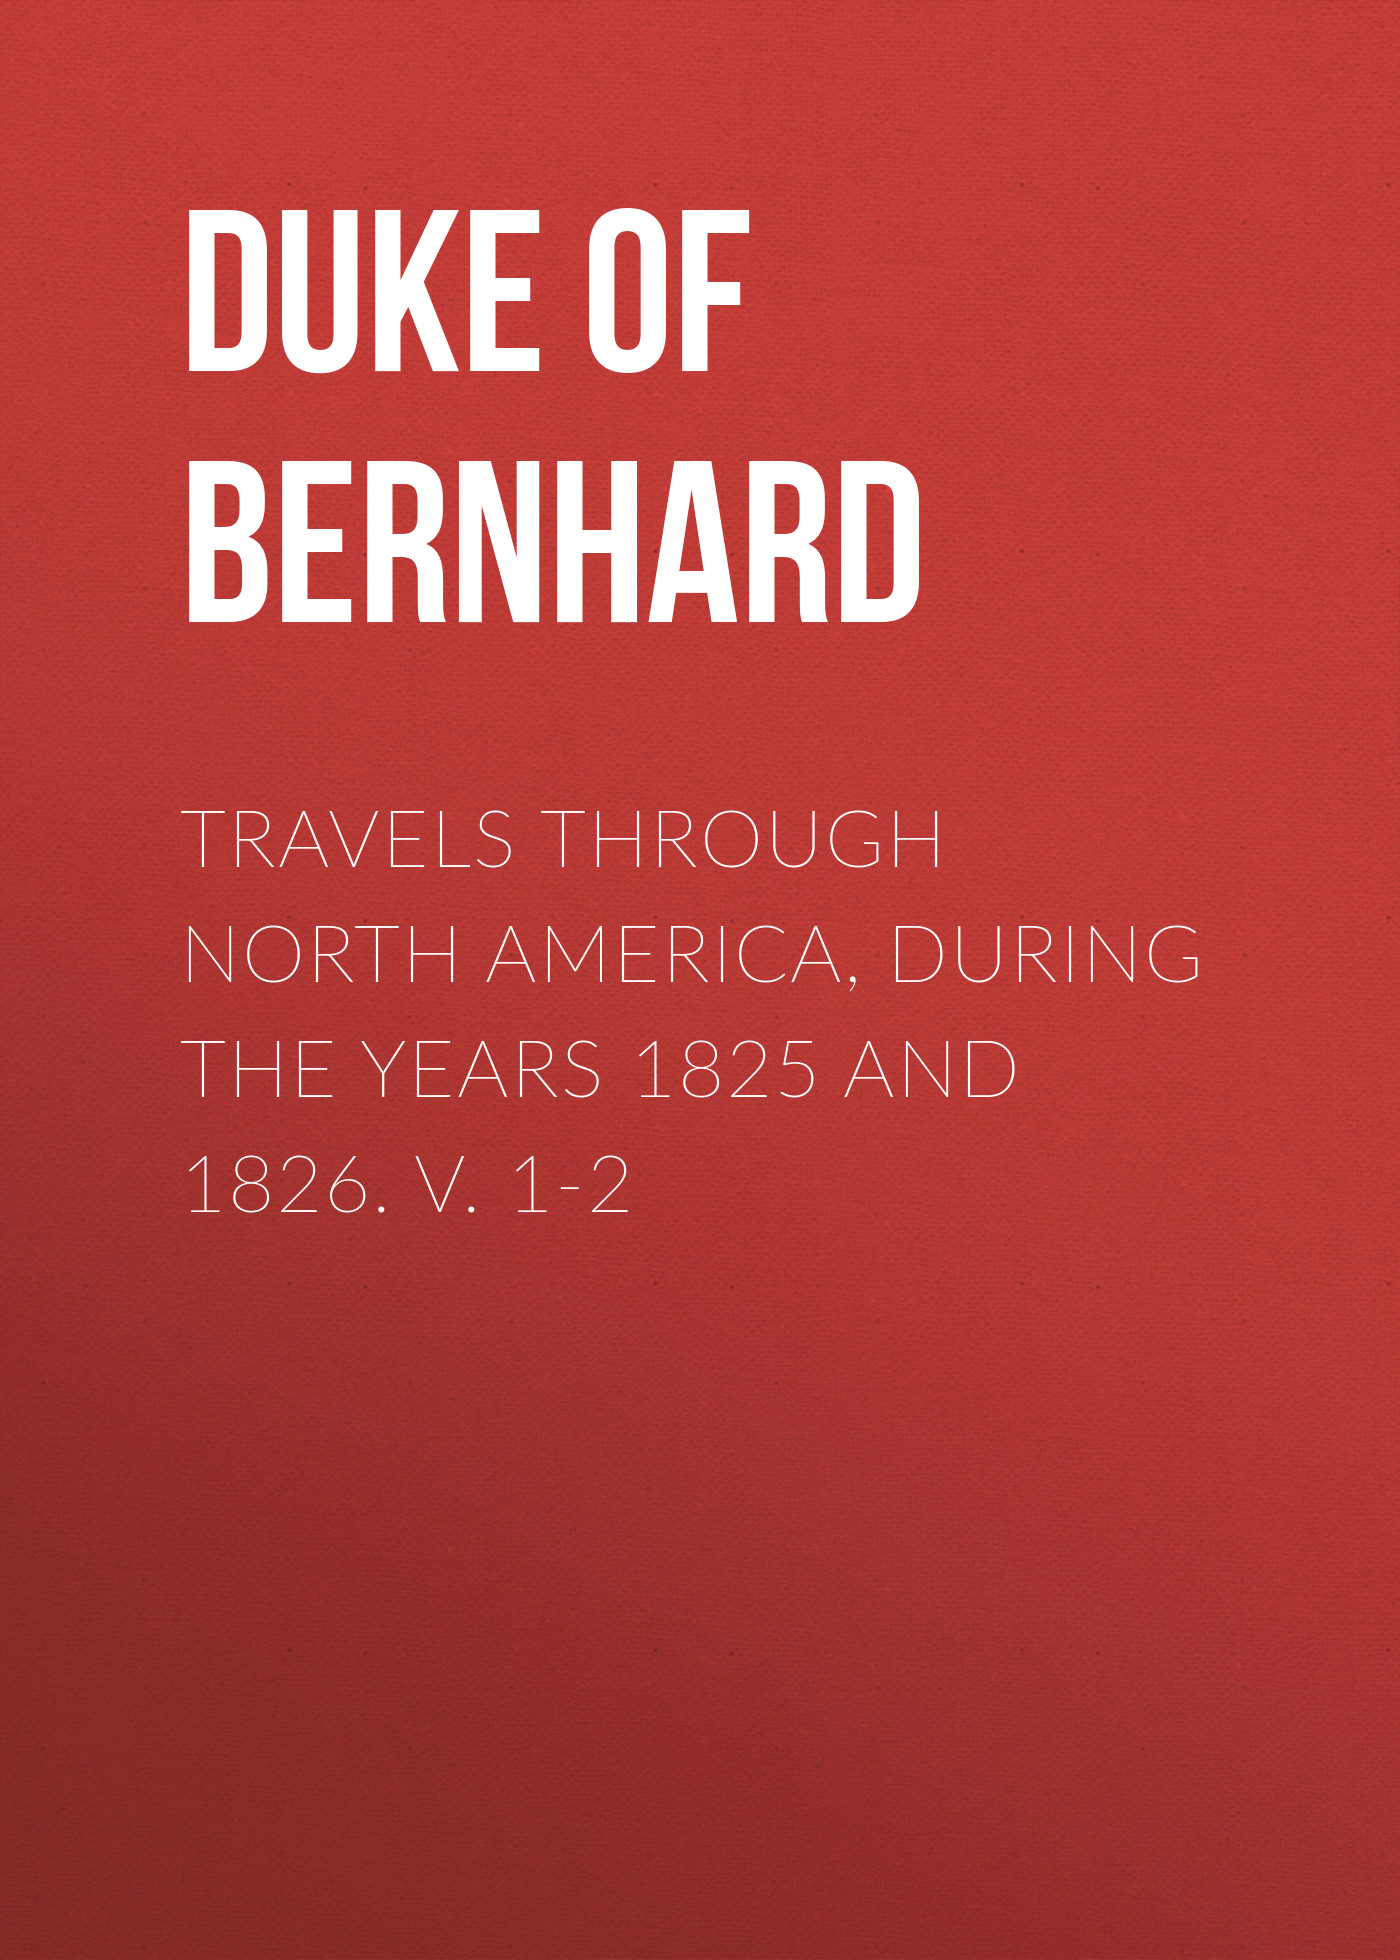 Duke of Saxe-Weimar-Eisenach Bernhard Travels Through North America, During the Years 1825 and 1826. v. 1-2